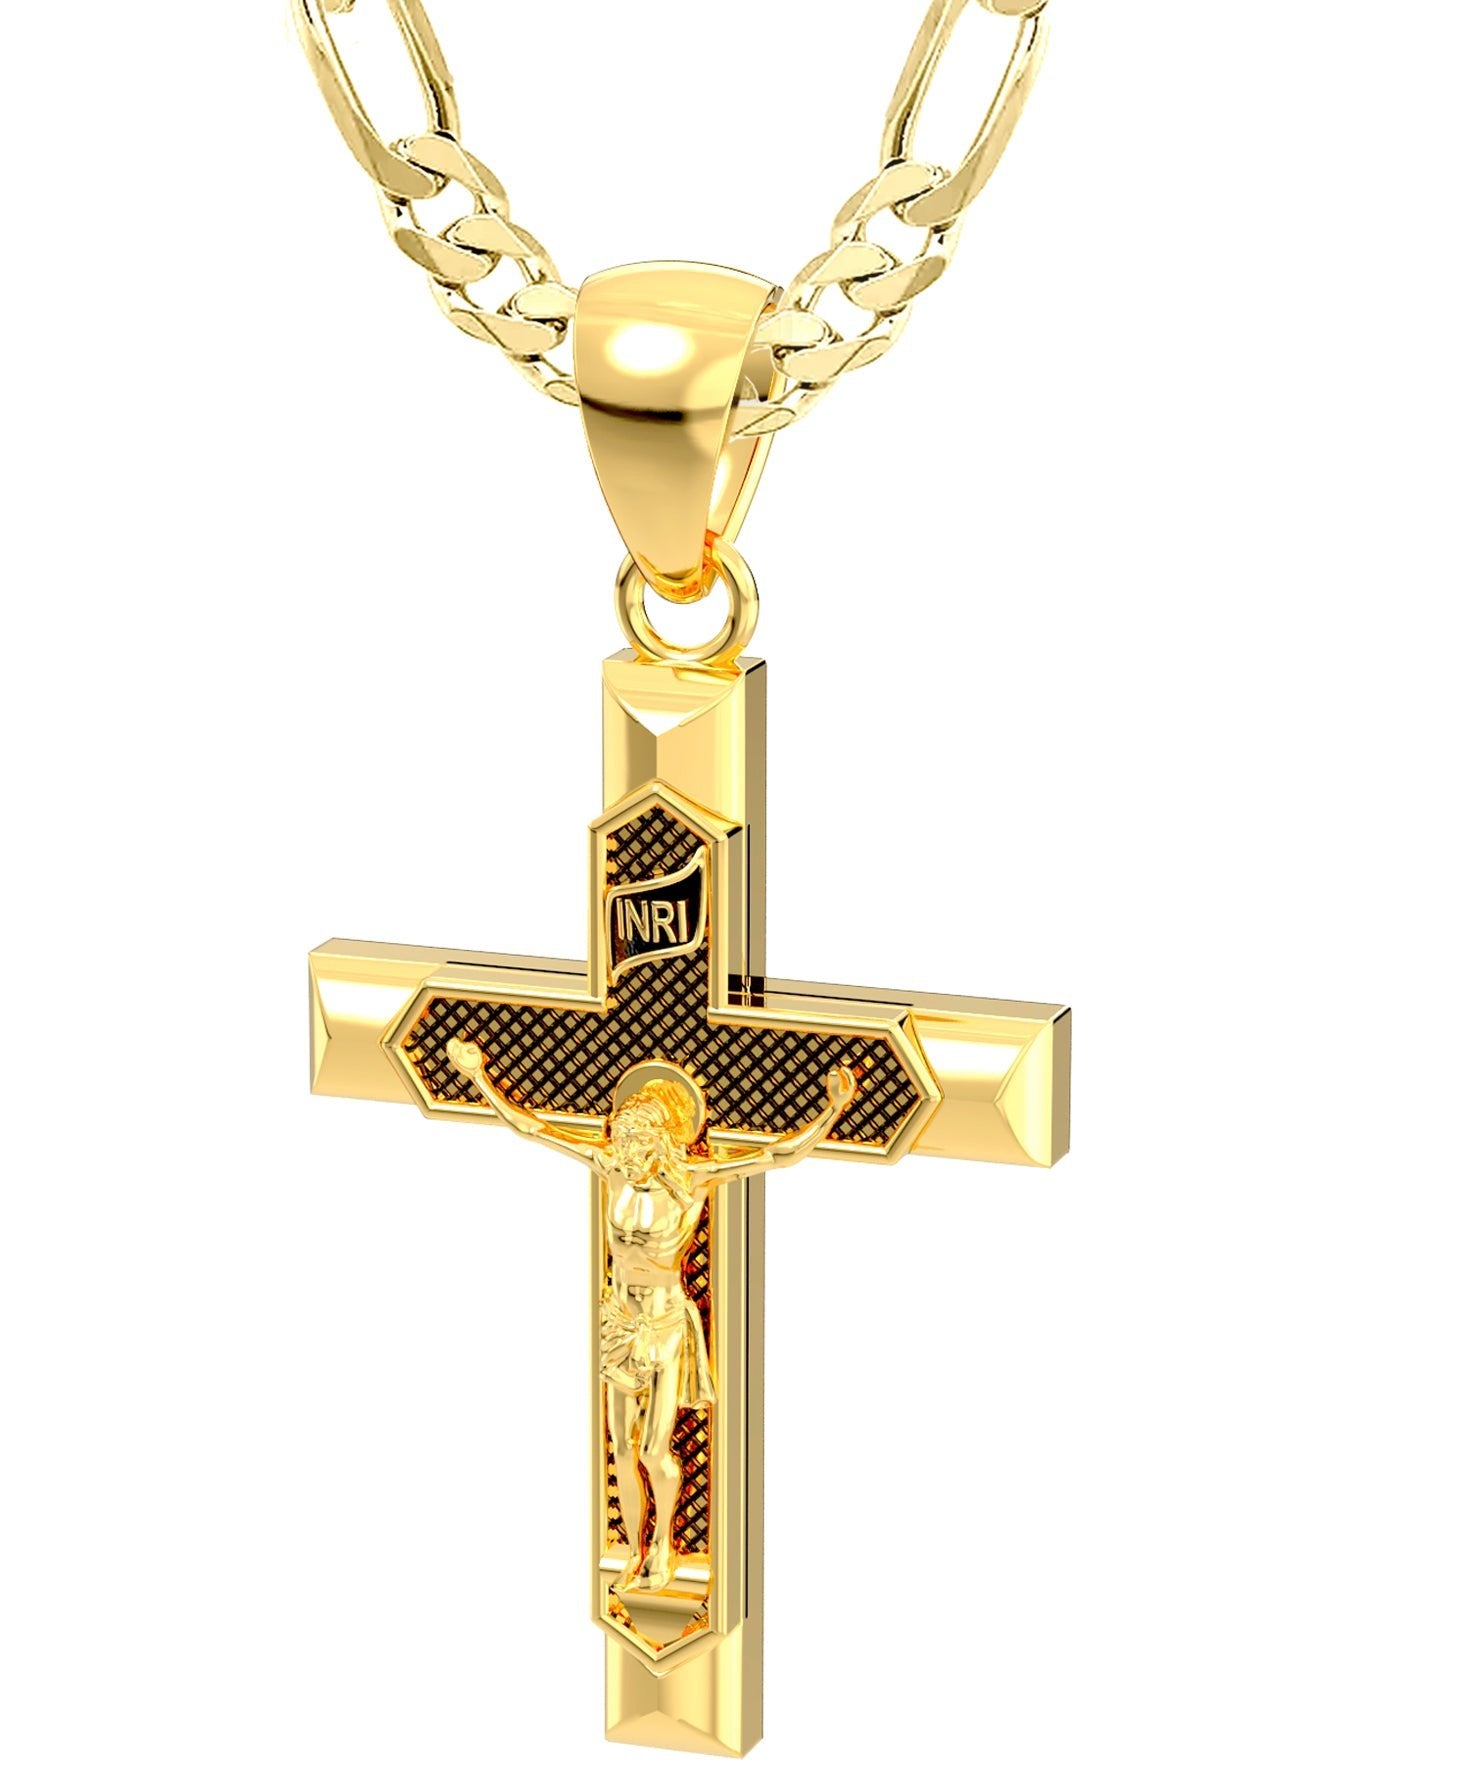 Buy U7 Men's Cross Pendant 18K Gold Plated Chain Lords Prayer Matthew 6:9  Necklace 22 Inch at Amazon.in